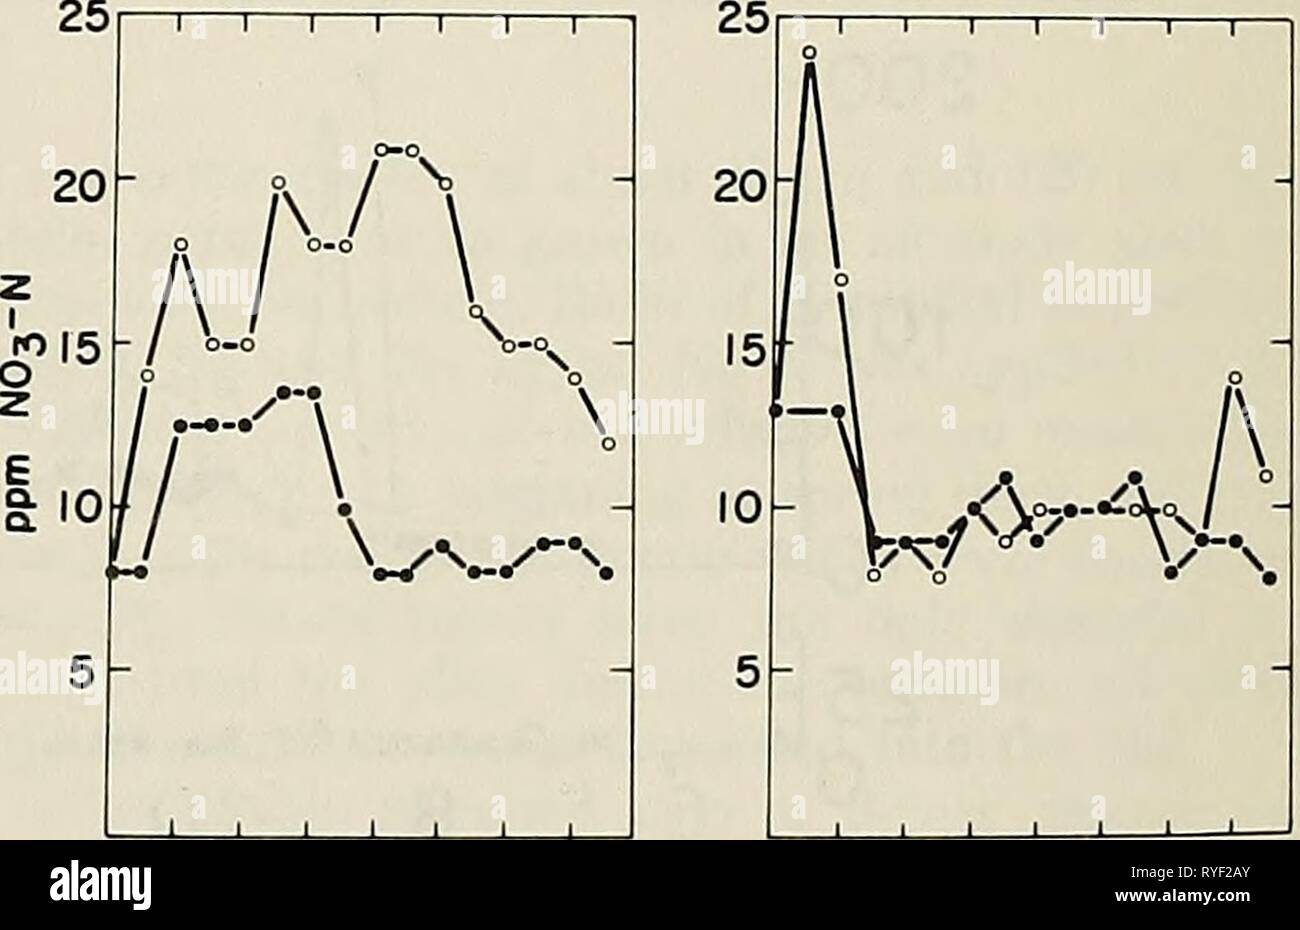 Efficient use of nitrogen on crop land in the Northeast  efficientuseofni00bark Year: 1980  Figure 17. Six-year average of nitrate-N contents in soil solu- tions from plots that received no N. Open circles are po- tatoes, closed circles are buckwheat. (R.V. Rourke, Maine) Figure 16. Cumulative N uptake derived from fertilizer N (FN), soil N (SN) ond grass clippings of the current year (CNl) end of the previous two years (CN2-CN3). Arrows indicate dotes of fertilizer application. (Data of J.L. Starr and H.C. DeRoo, Connecticut) 56 kg/ha was not needed. As can be seen in Table 9, N removal in tu Stock Photo